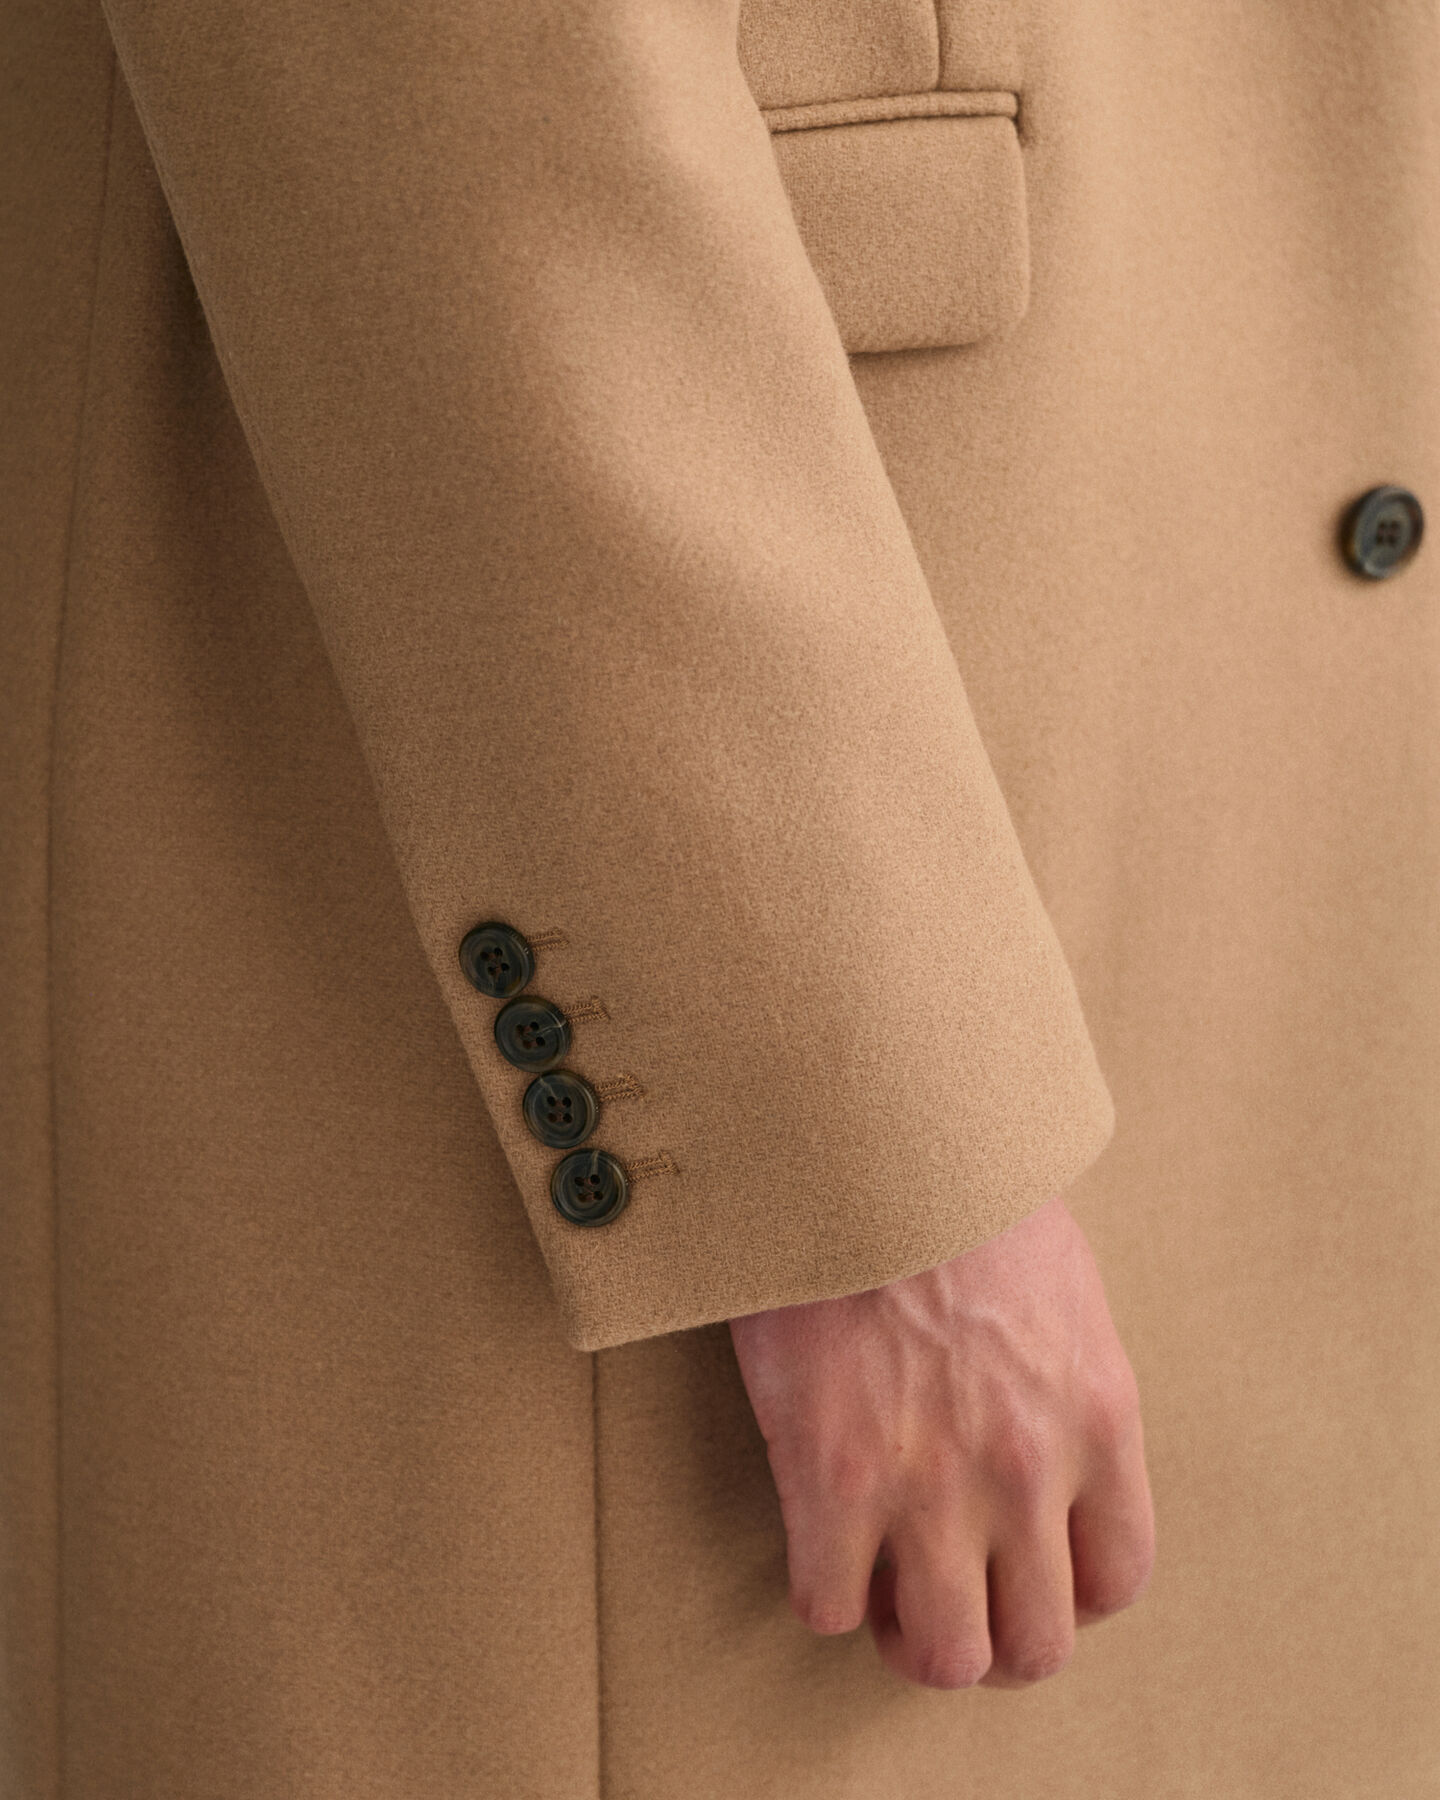 The Perfect Fit: Topcoats · Effortless Gent